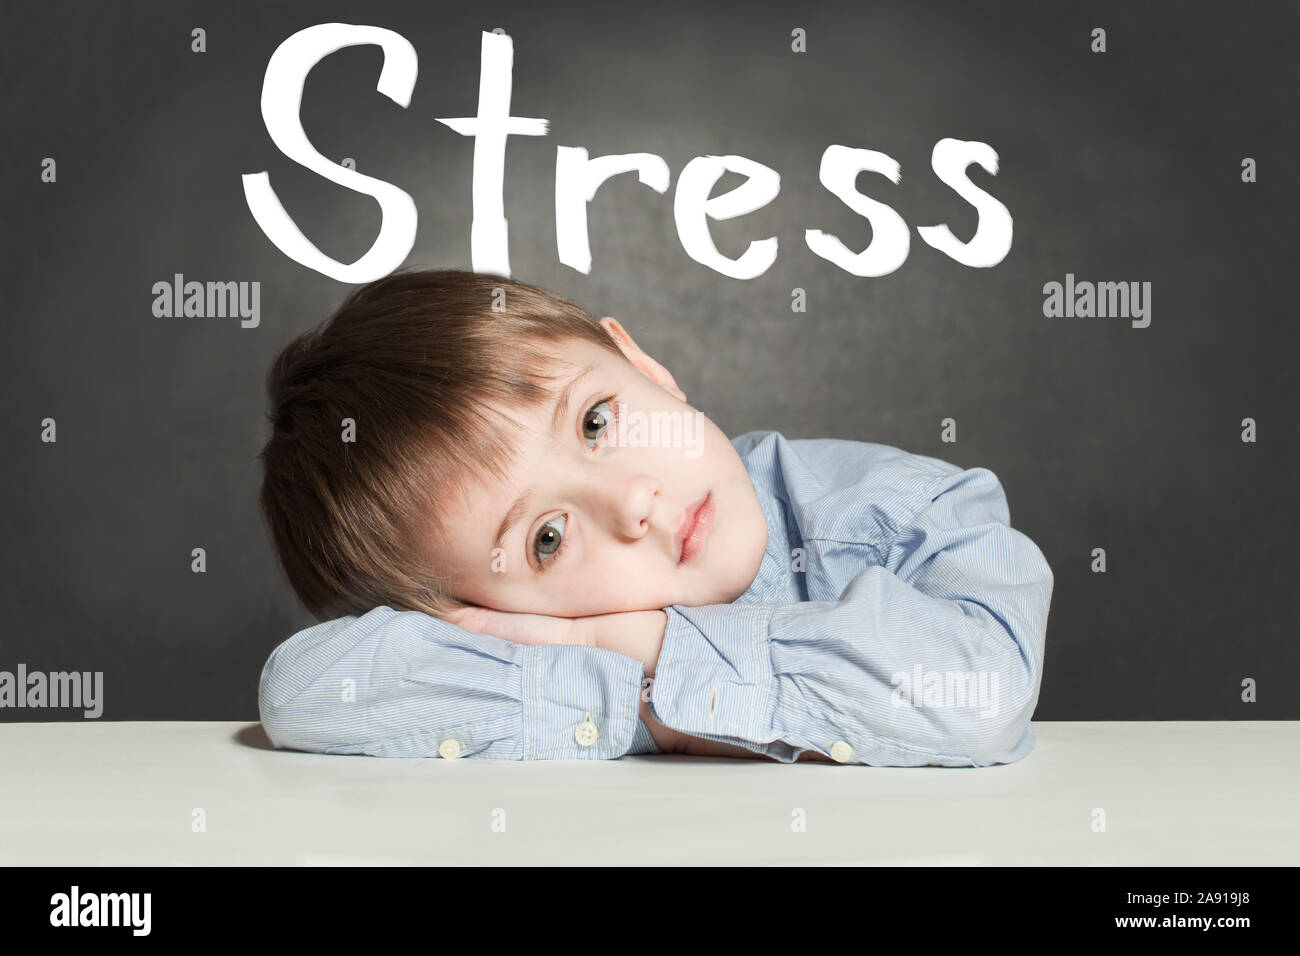 Tired boy with stress. Sad concept Stock Photo